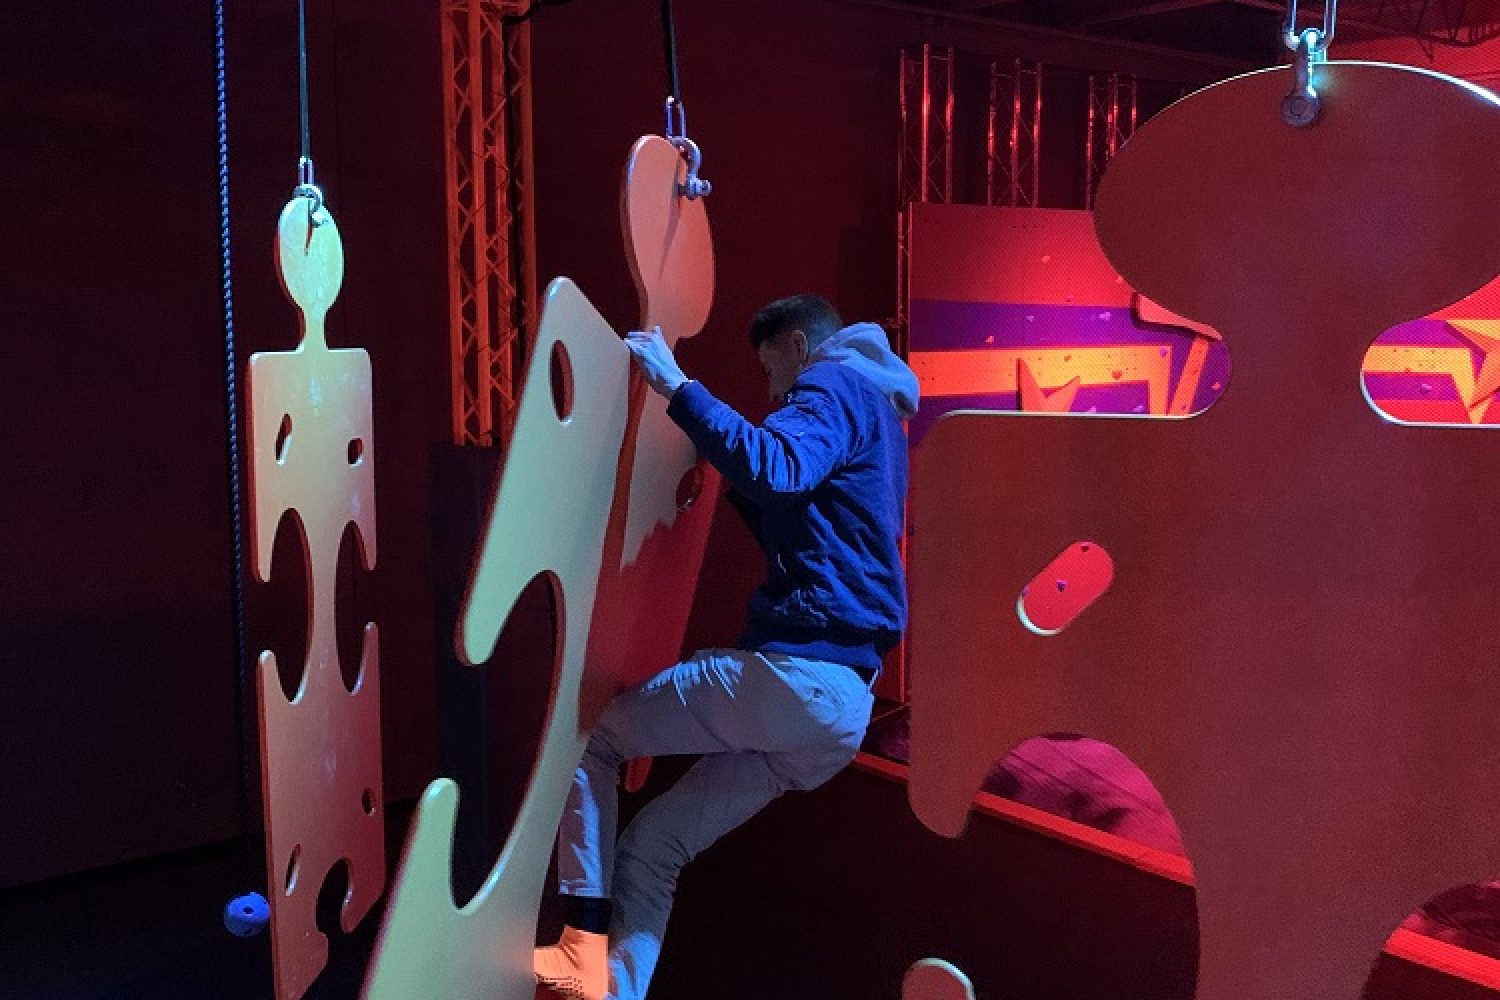 a person hangs on a giant puzzle piece at the ninja obstacle course at k1 speed mount kisco